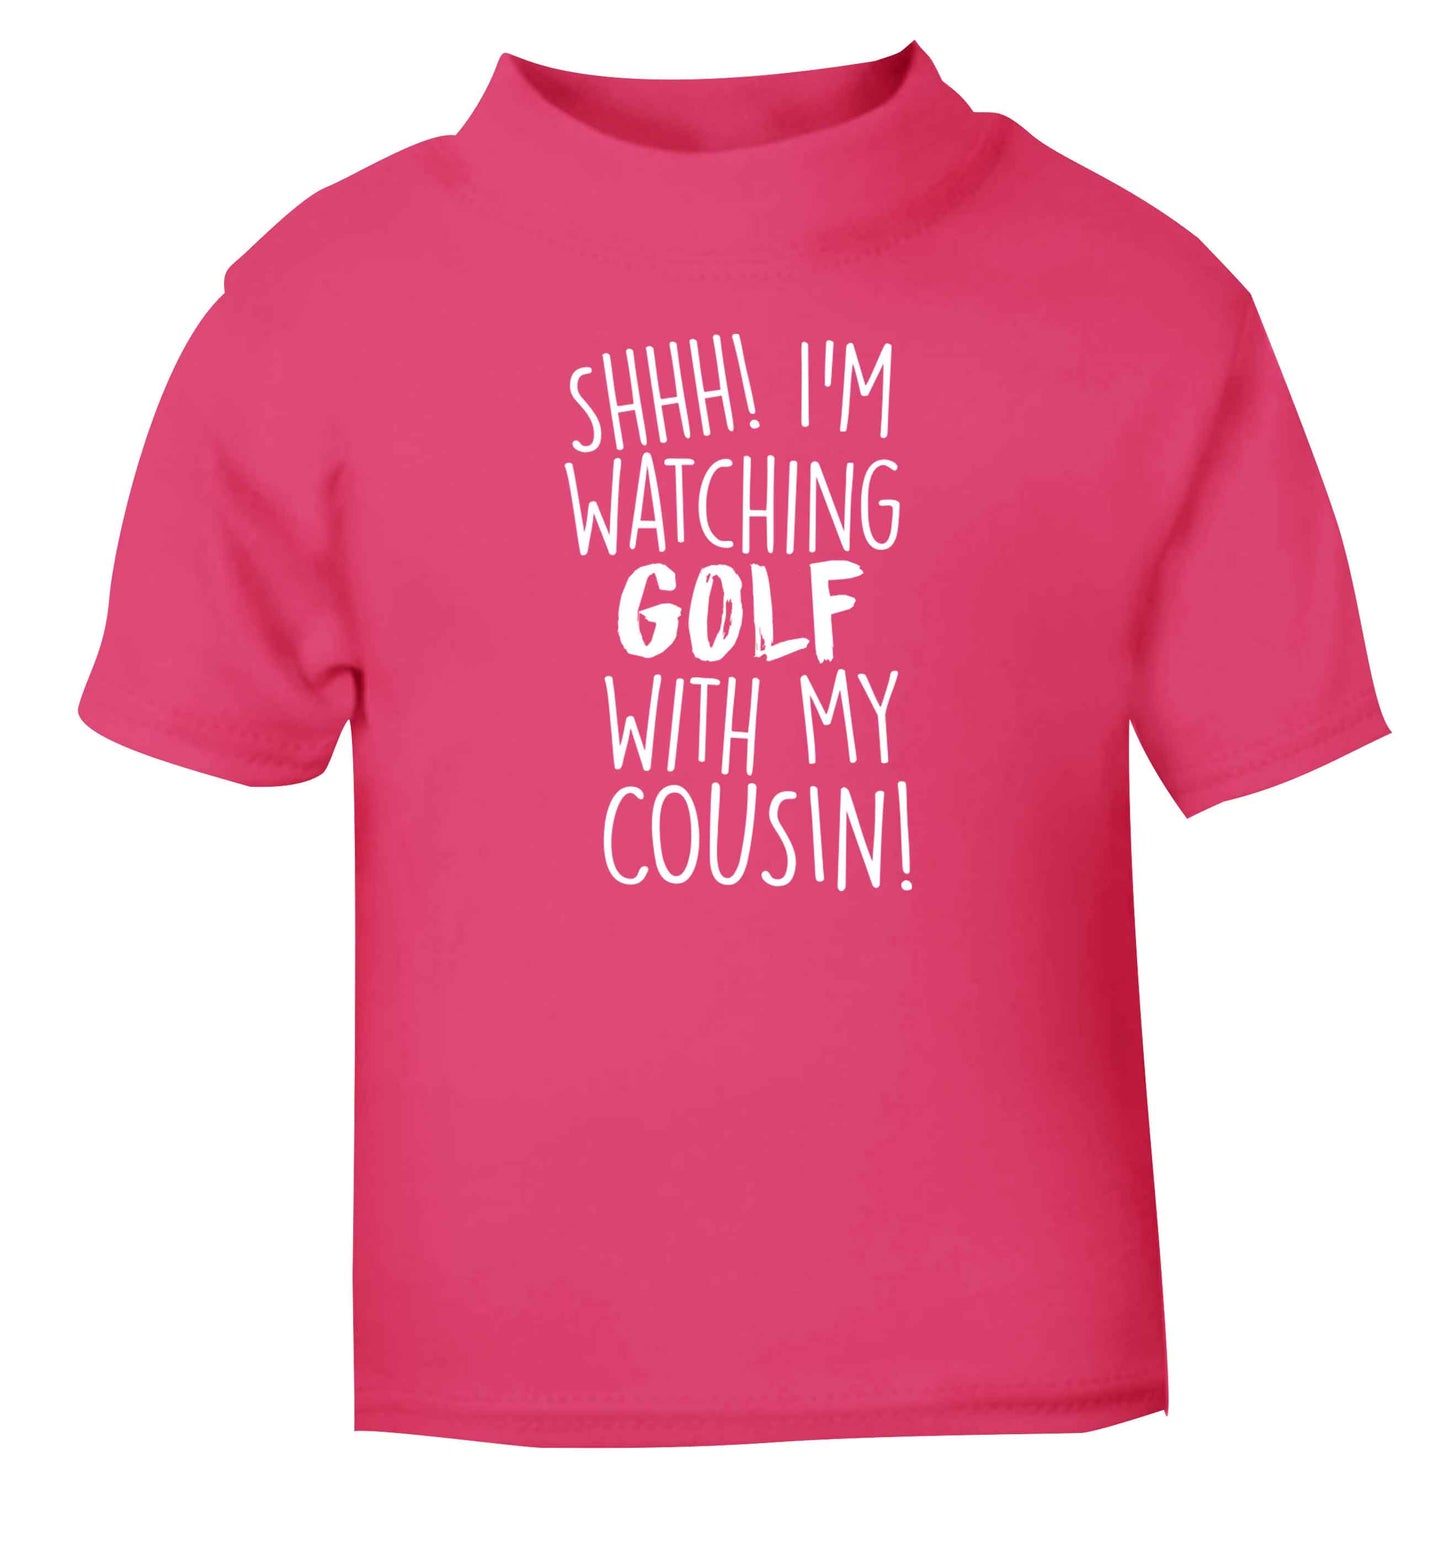 Shh I'm watching golf with my cousin pink Baby Toddler Tshirt 2 Years